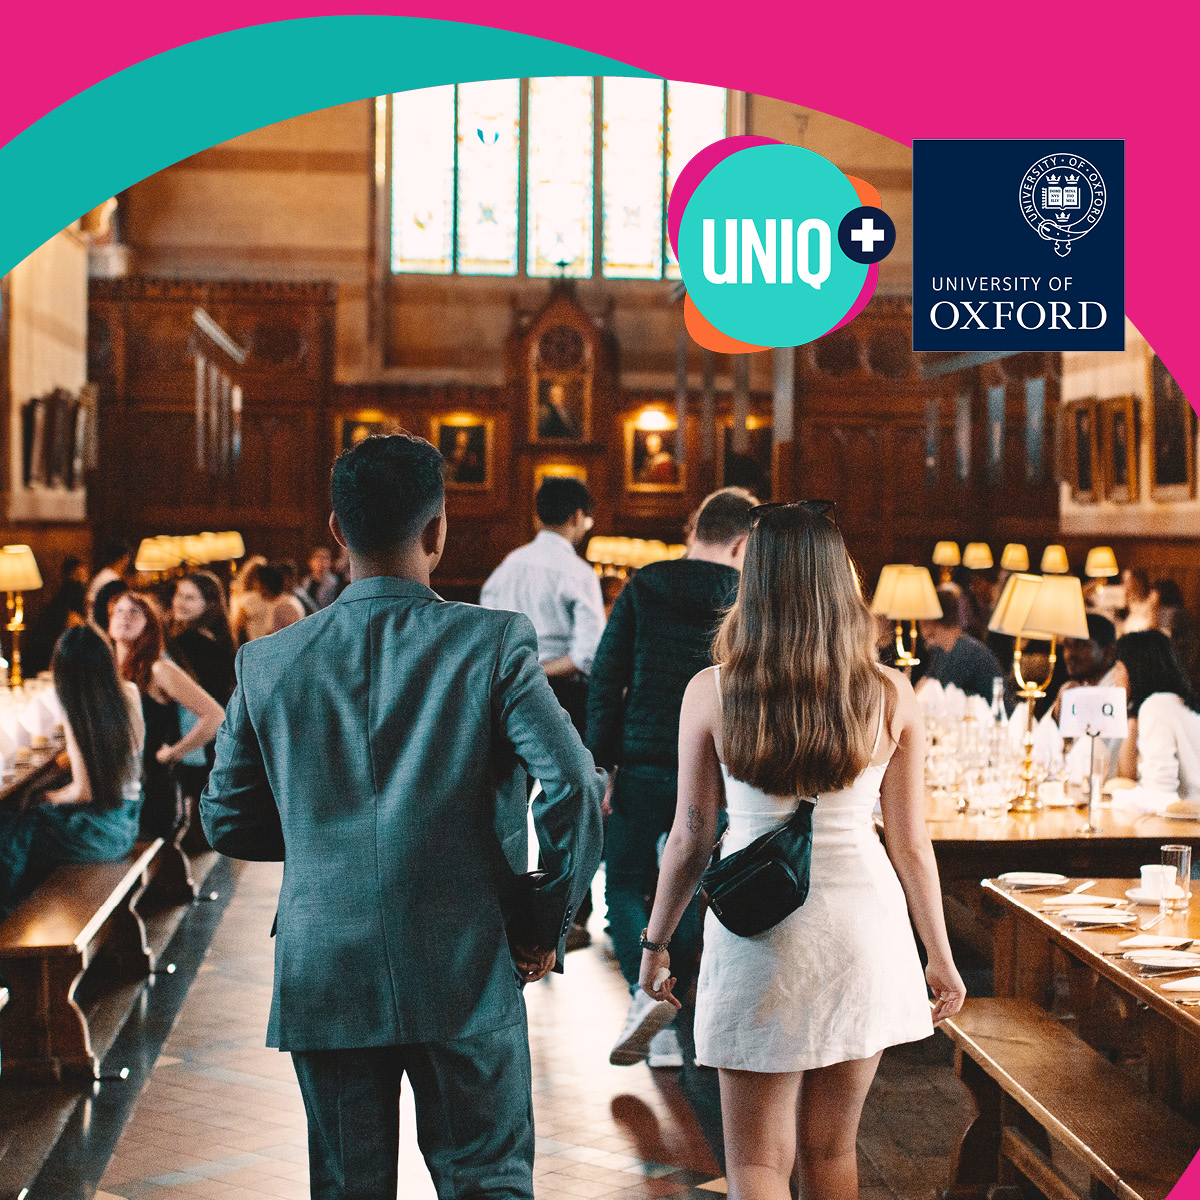 Applications are now OPEN for 2024 UNIQ+ postgraduate research internships! Explore postgraduate study at Oxford University this summer and enhance your research skills. To find out more and apply, visit: ox.ac.uk/admissions/gra… Application deadline: 21 February 2024